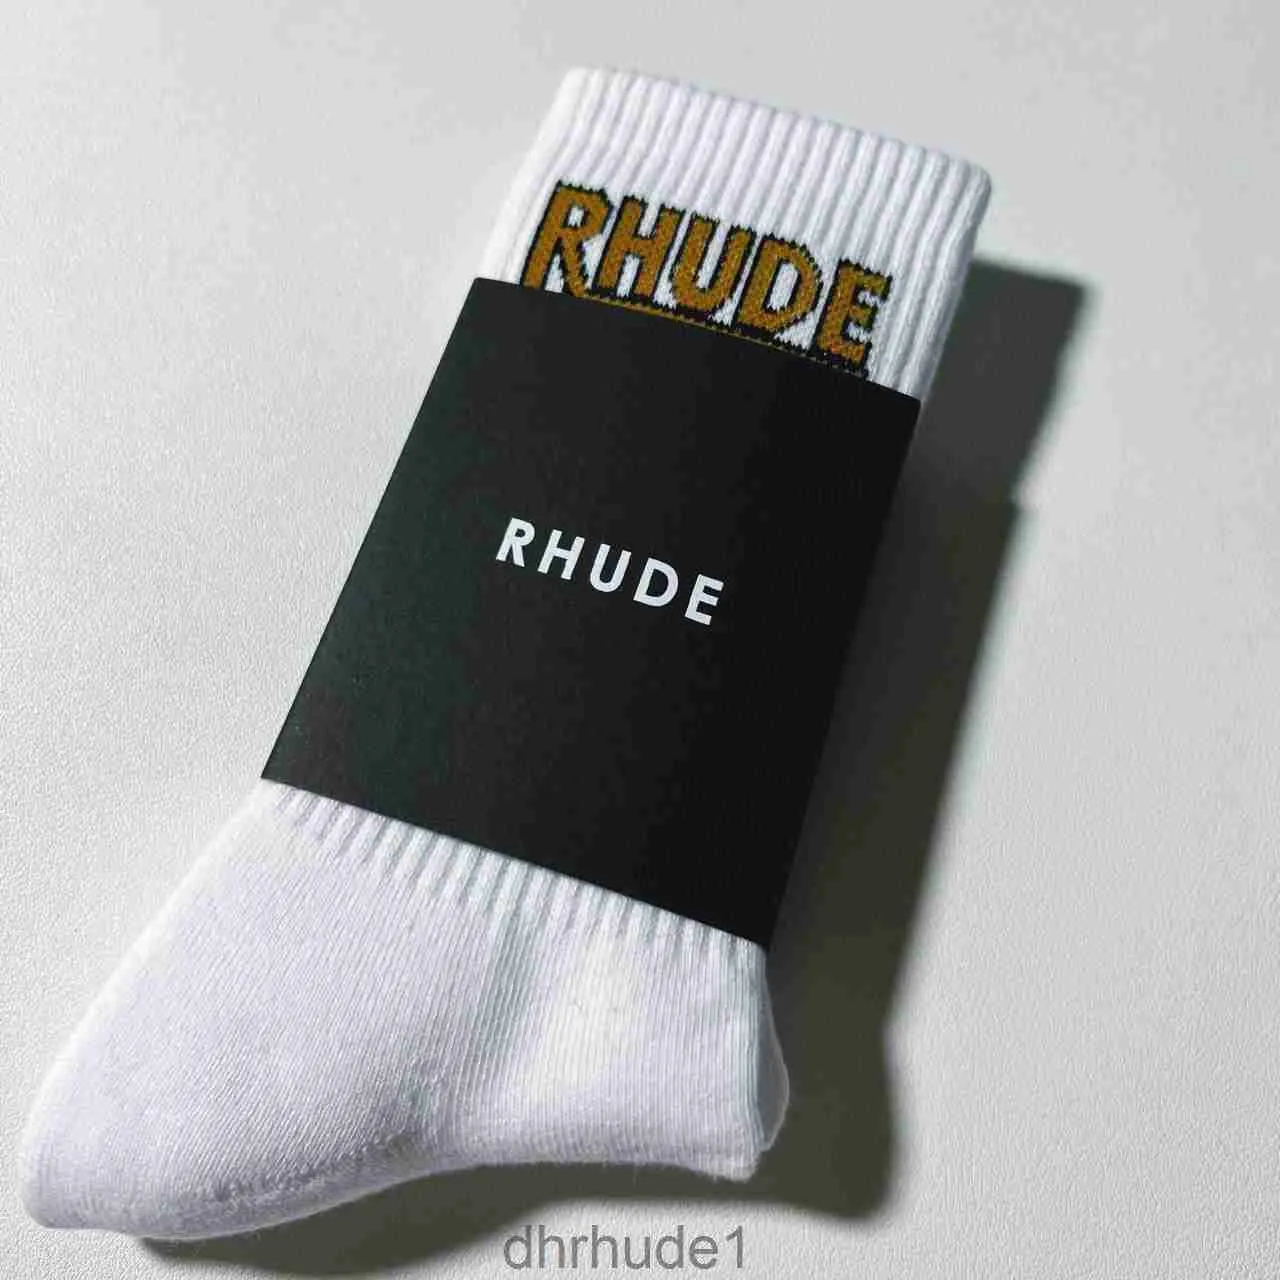 Rhude Socks Designer Socks for Mens Womens Luxury High Quality Stockings Fashion Represent Classic Cotton Comfortable Let in Air Absorb Sweat Knitted Cotton s B6ne